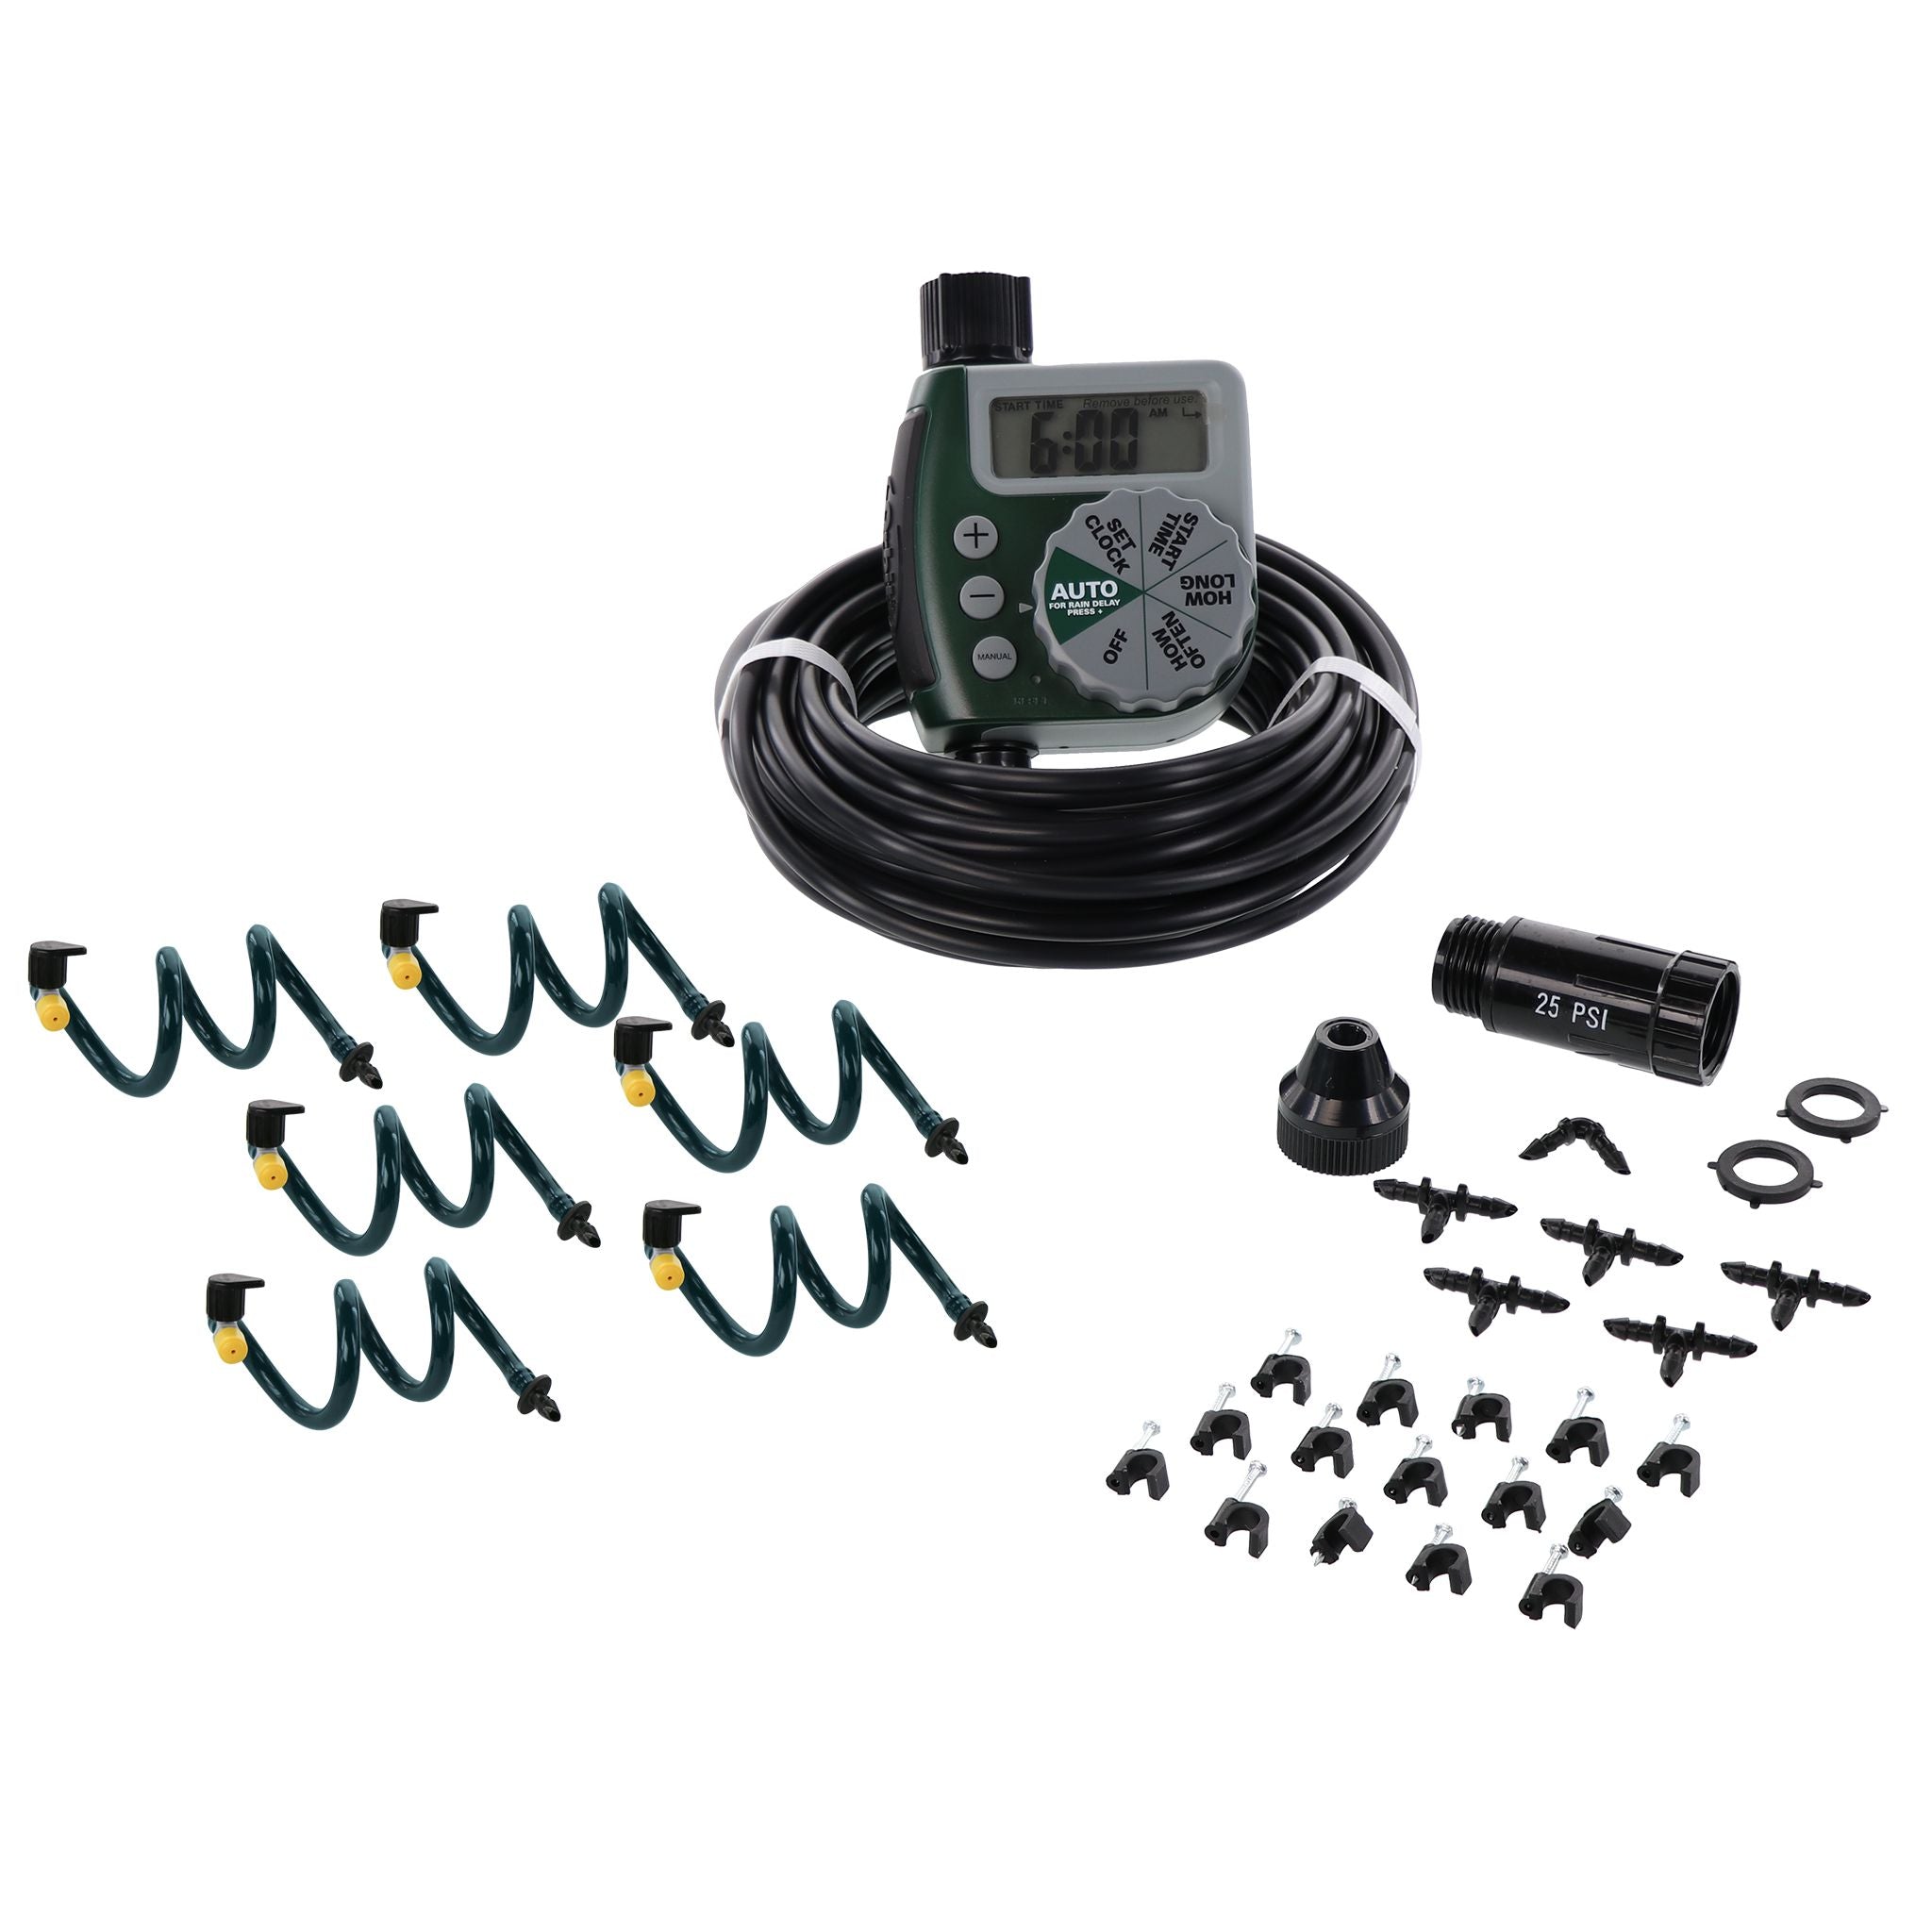 Hanging Basket Drip Irrigation Watering Kit with 1-Outlet Digital